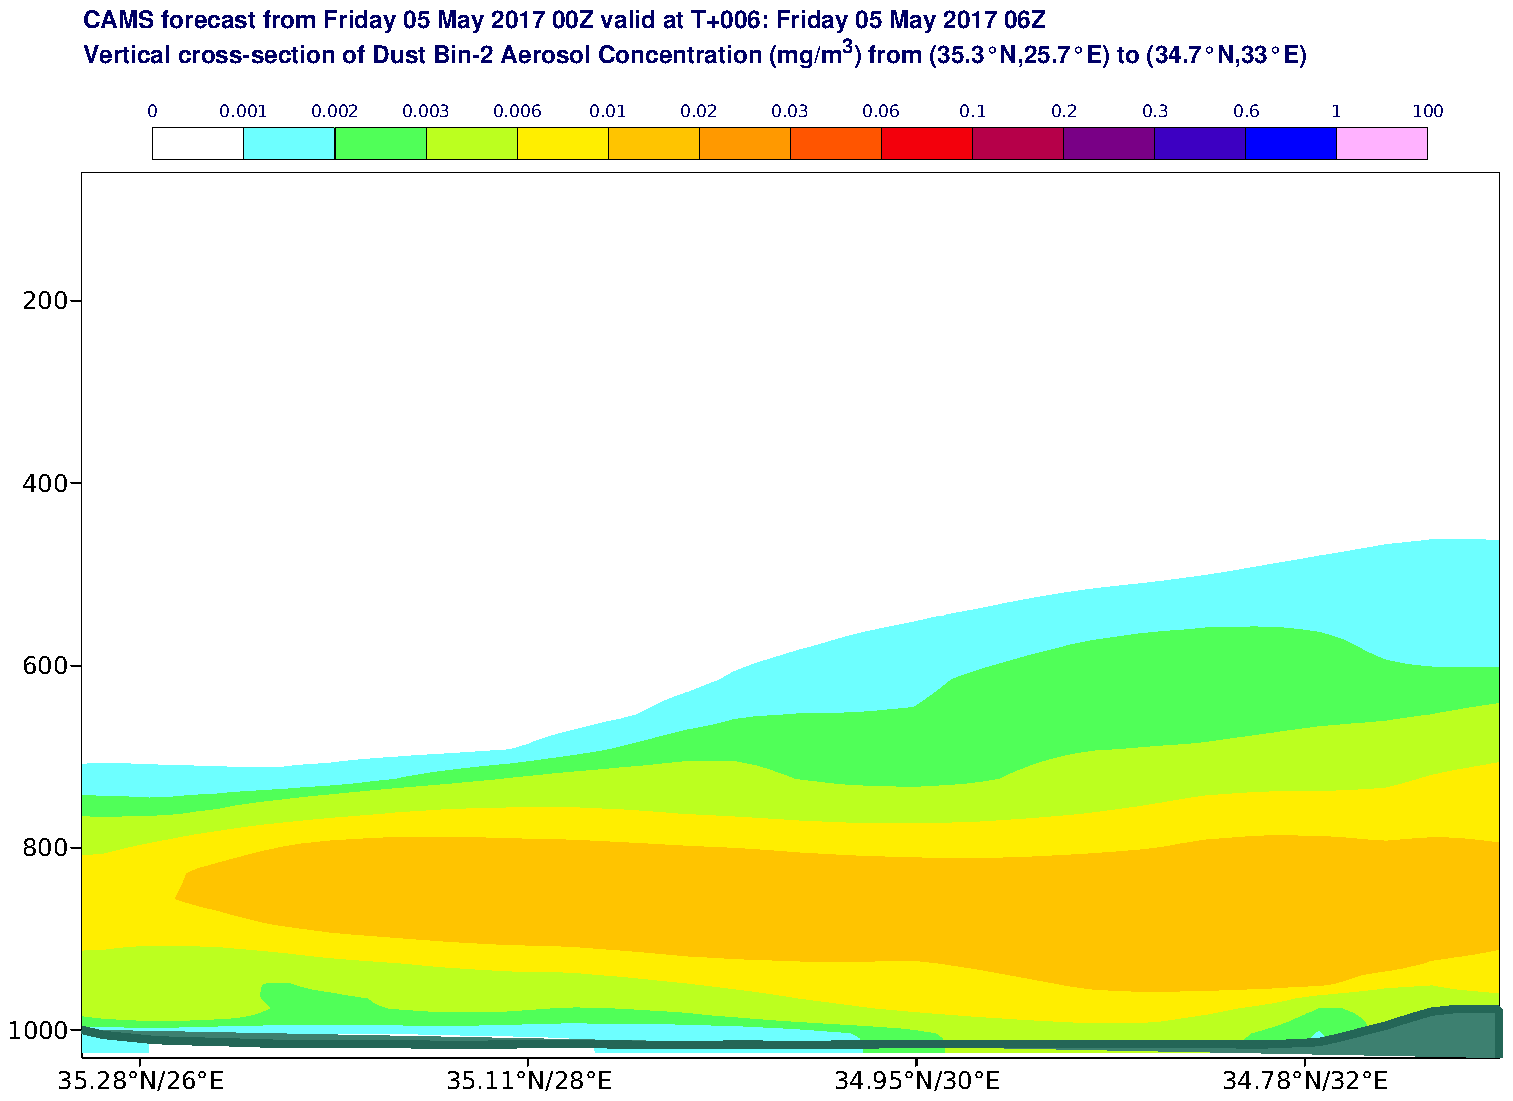 Vertical cross-section of Dust Bin-2 Aerosol Concentration (mg/m3) valid at T6 - 2017-05-05 06:00